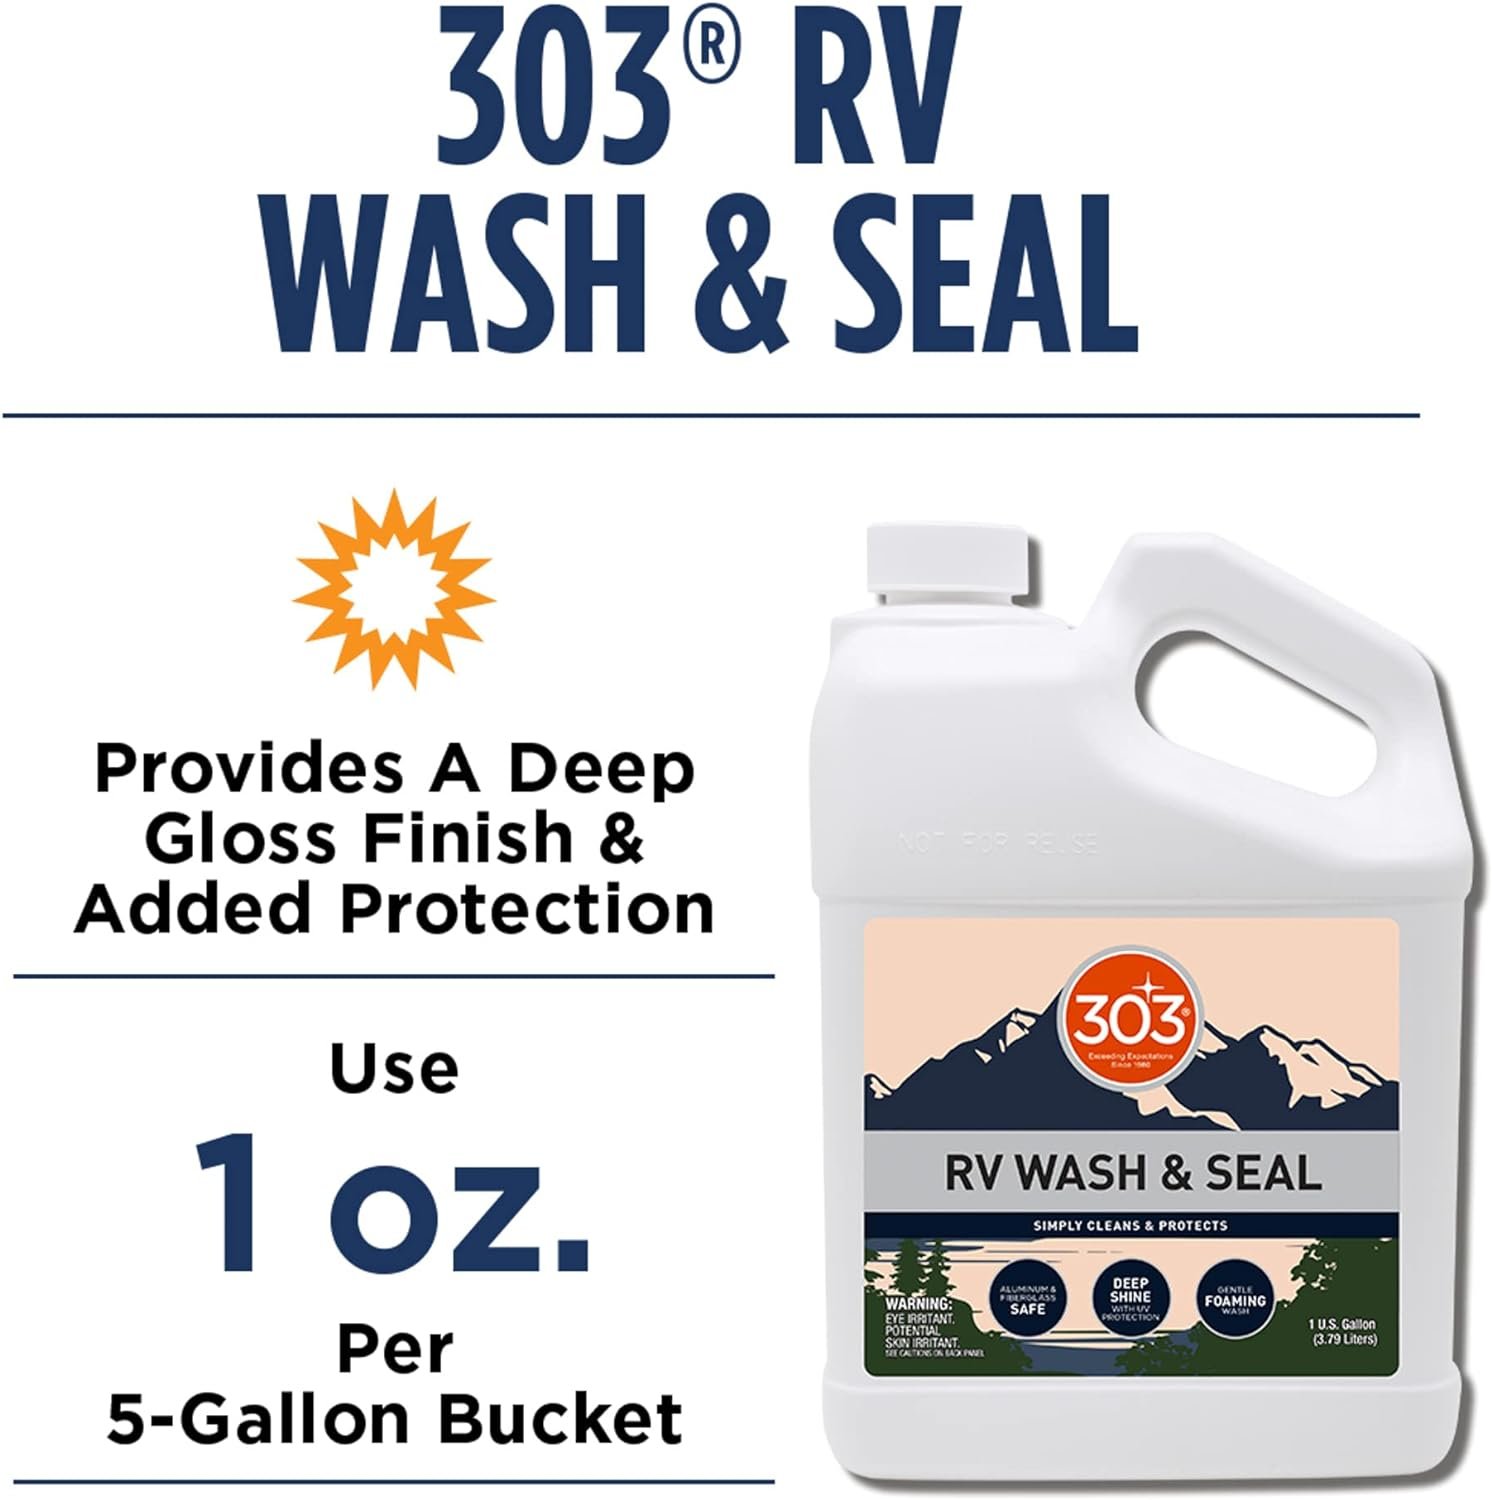 303 RV Wash & Seal Review